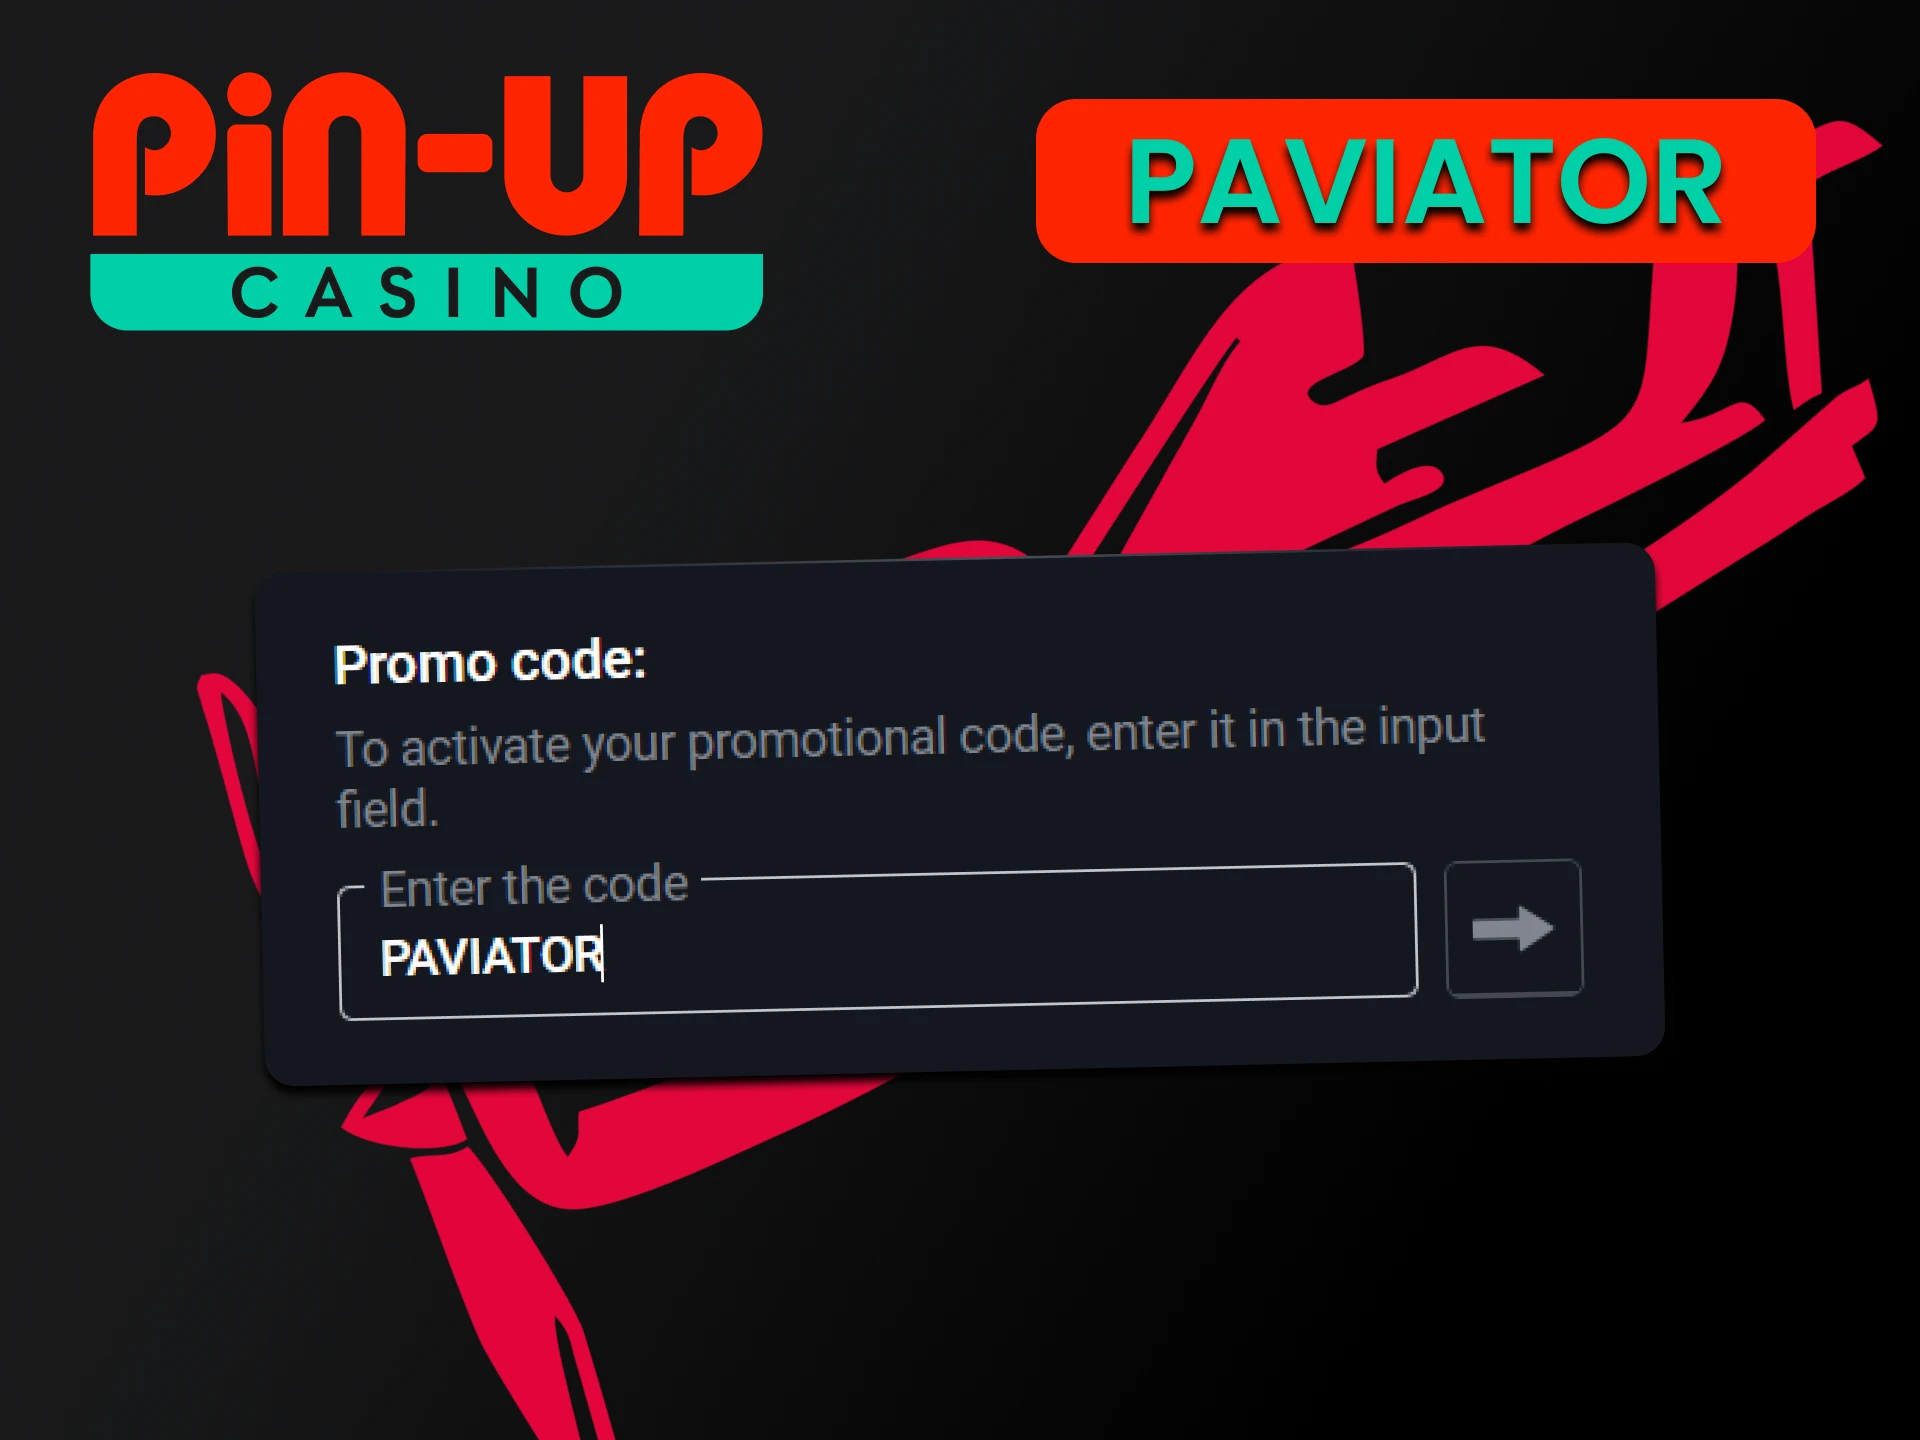 Follow a couple of simple steps to enter the Pin Up promo code.